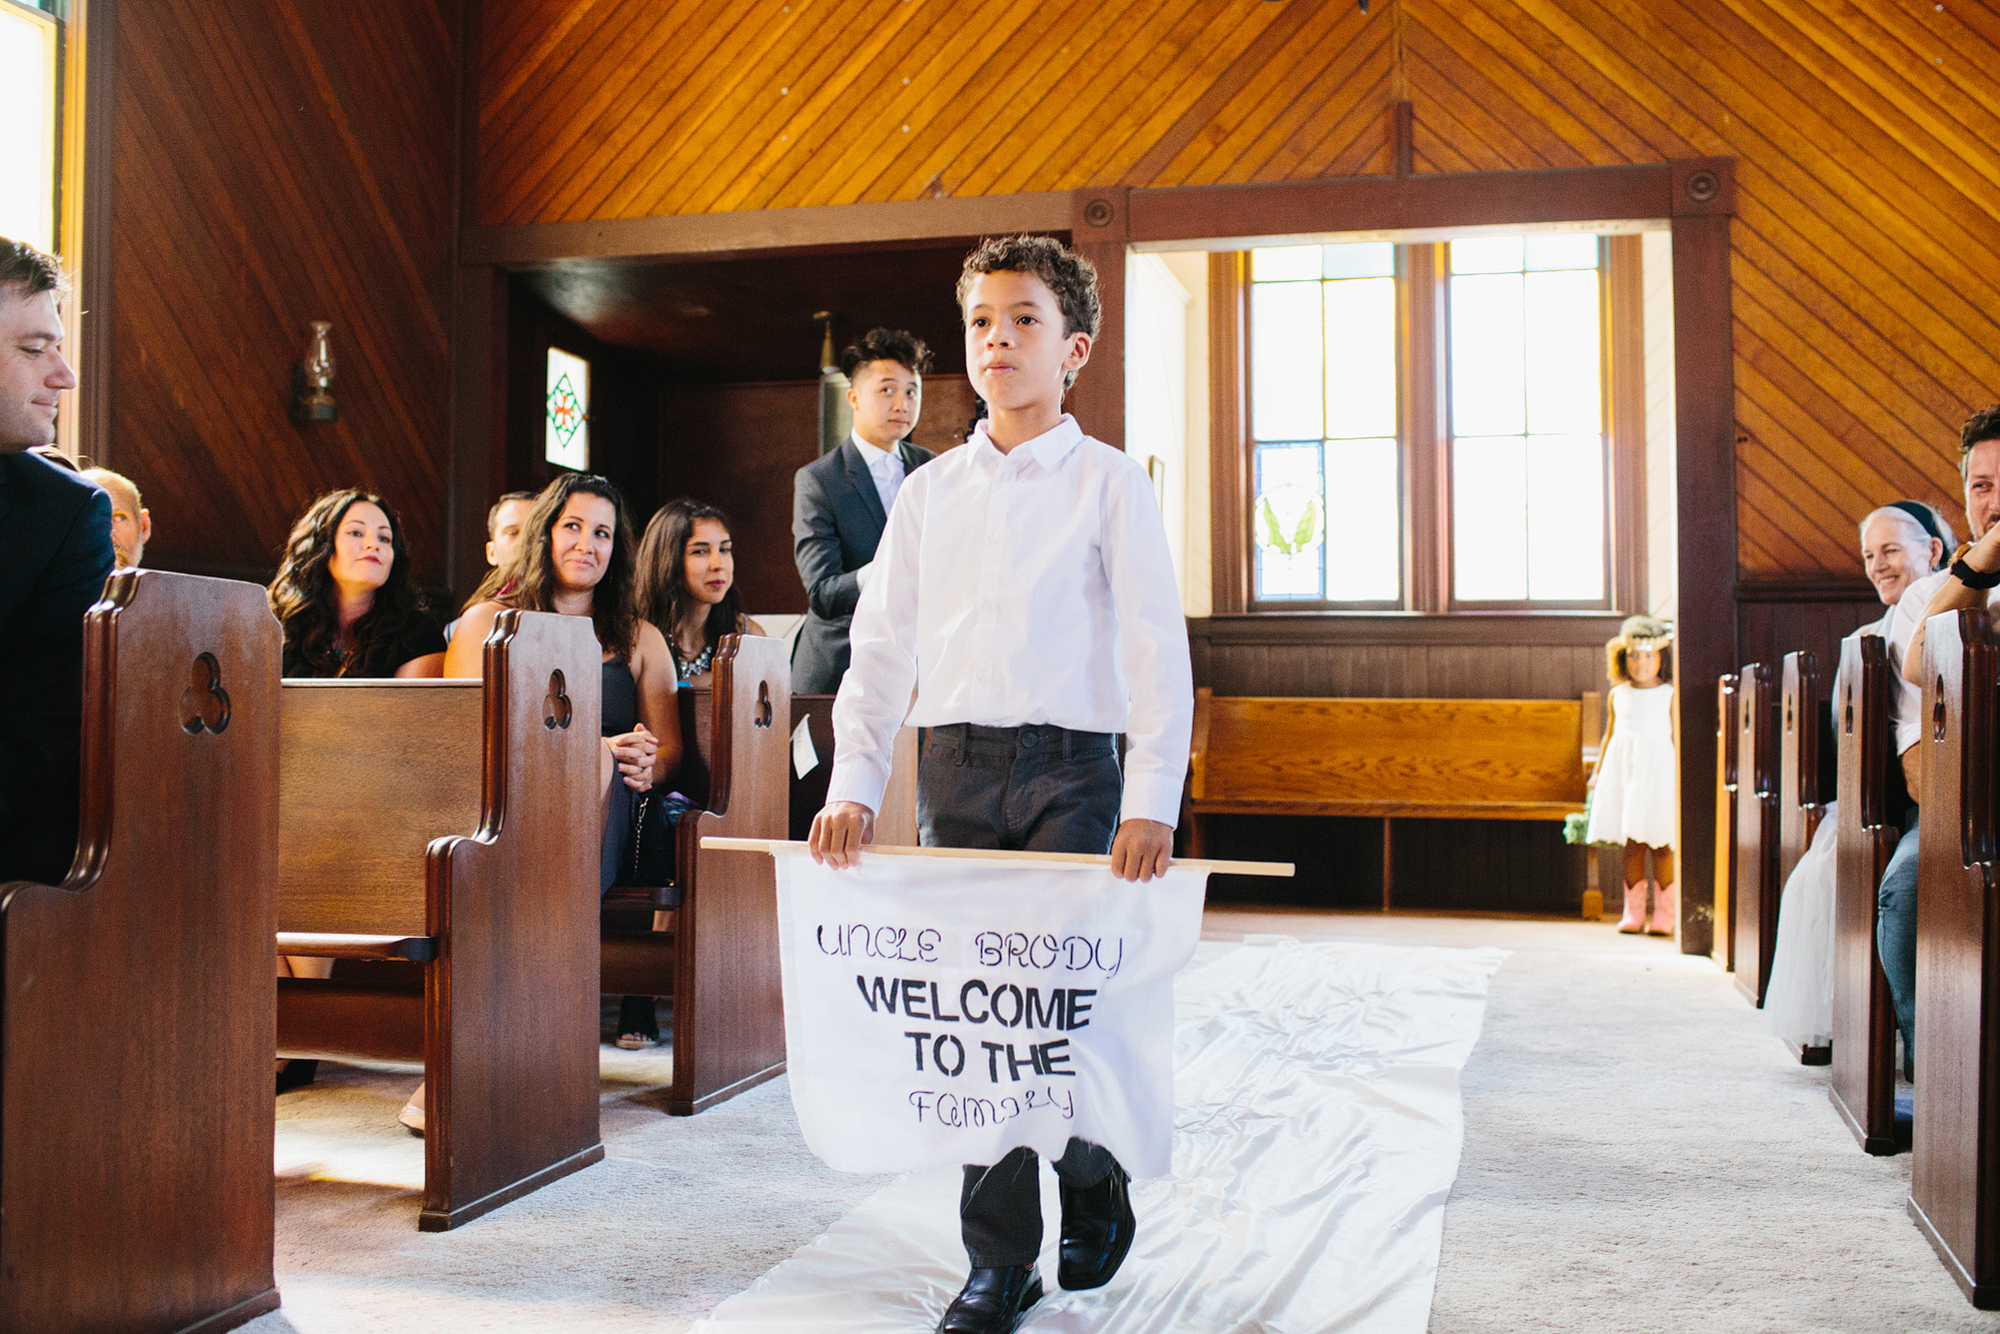 The ring bearer carried a sign down the aisle. 